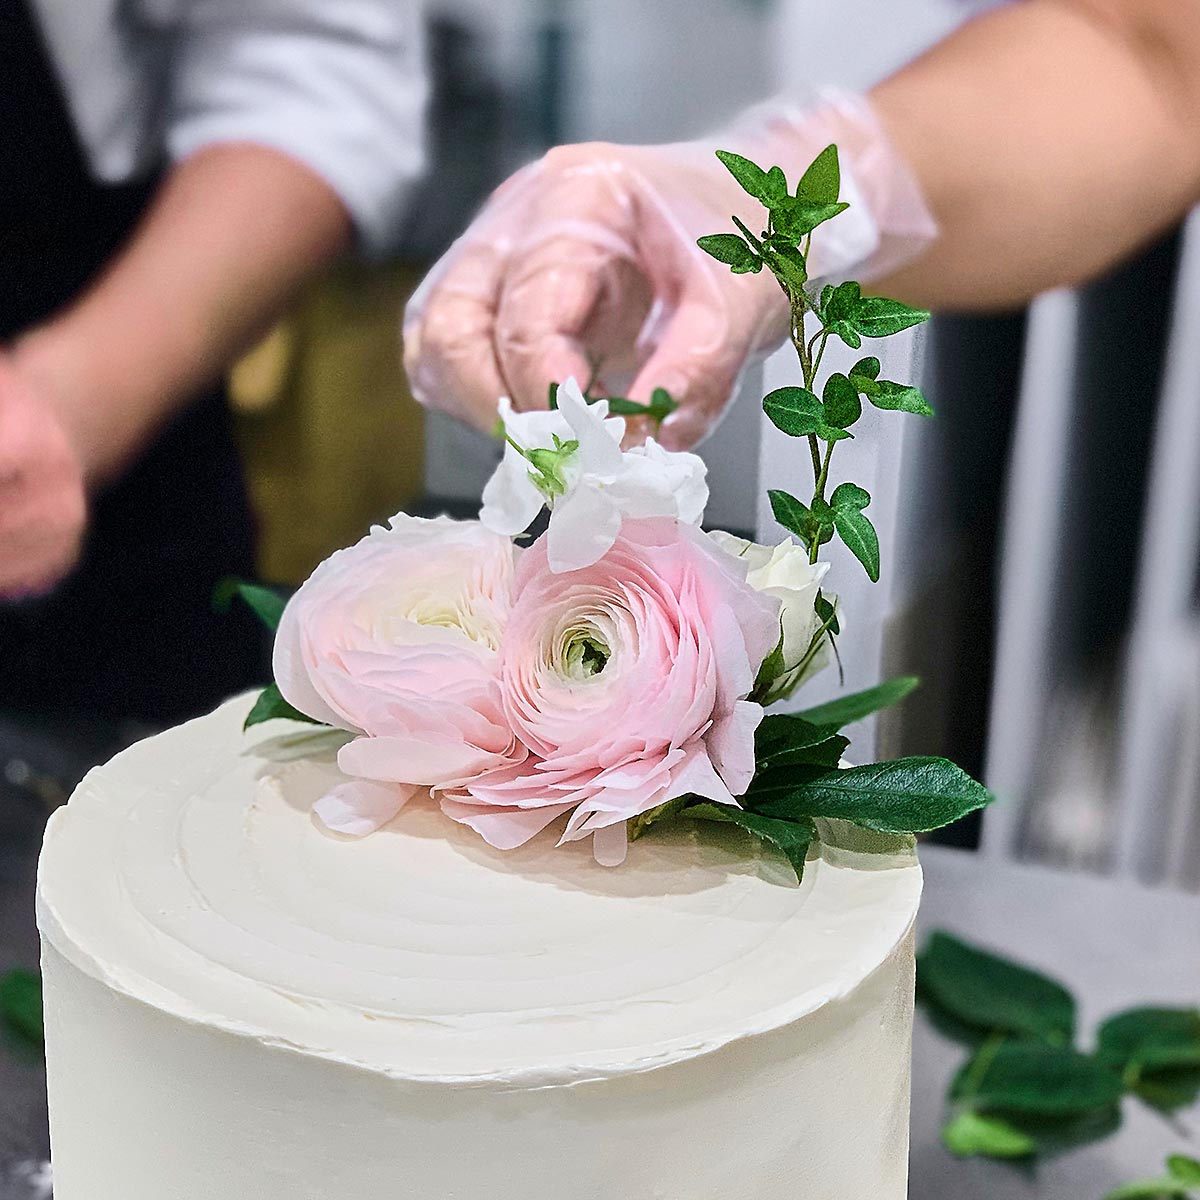 Halal Wedding Cakes In Singapore: 7 Stores To Get Them!